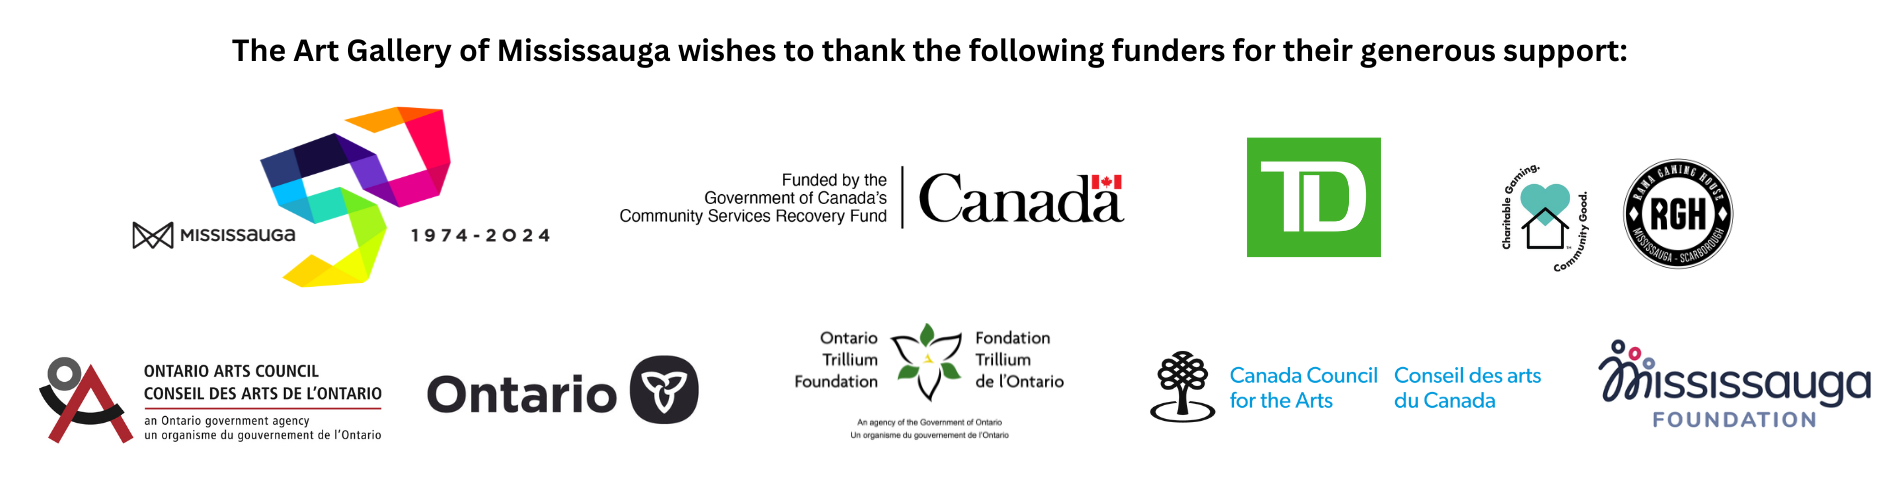 REV Thank Art Gallery of Mississauga wishes to thank the following funders for their support 11 × 17in Website 1